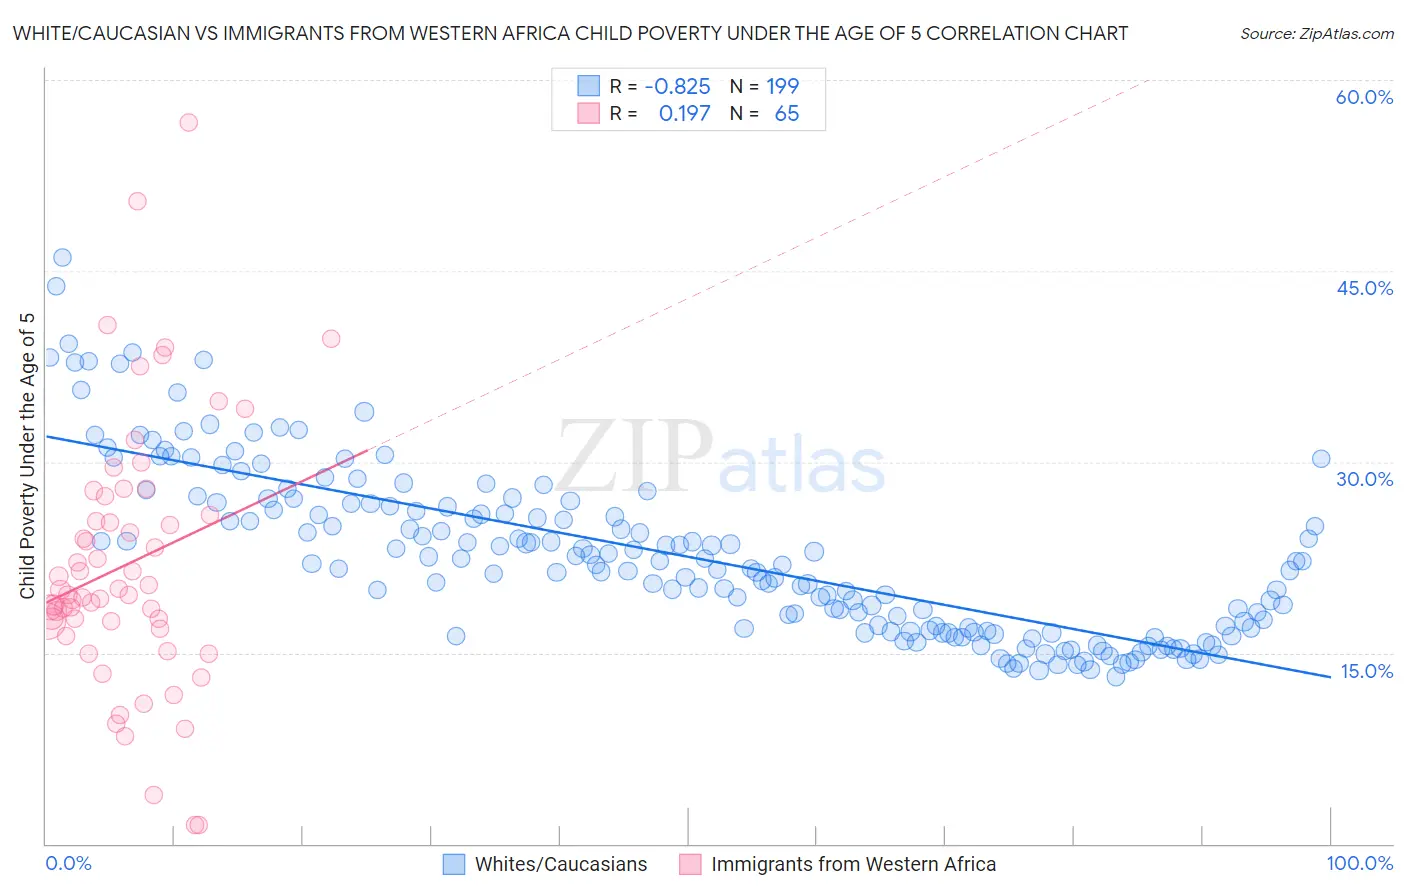 White/Caucasian vs Immigrants from Western Africa Child Poverty Under the Age of 5